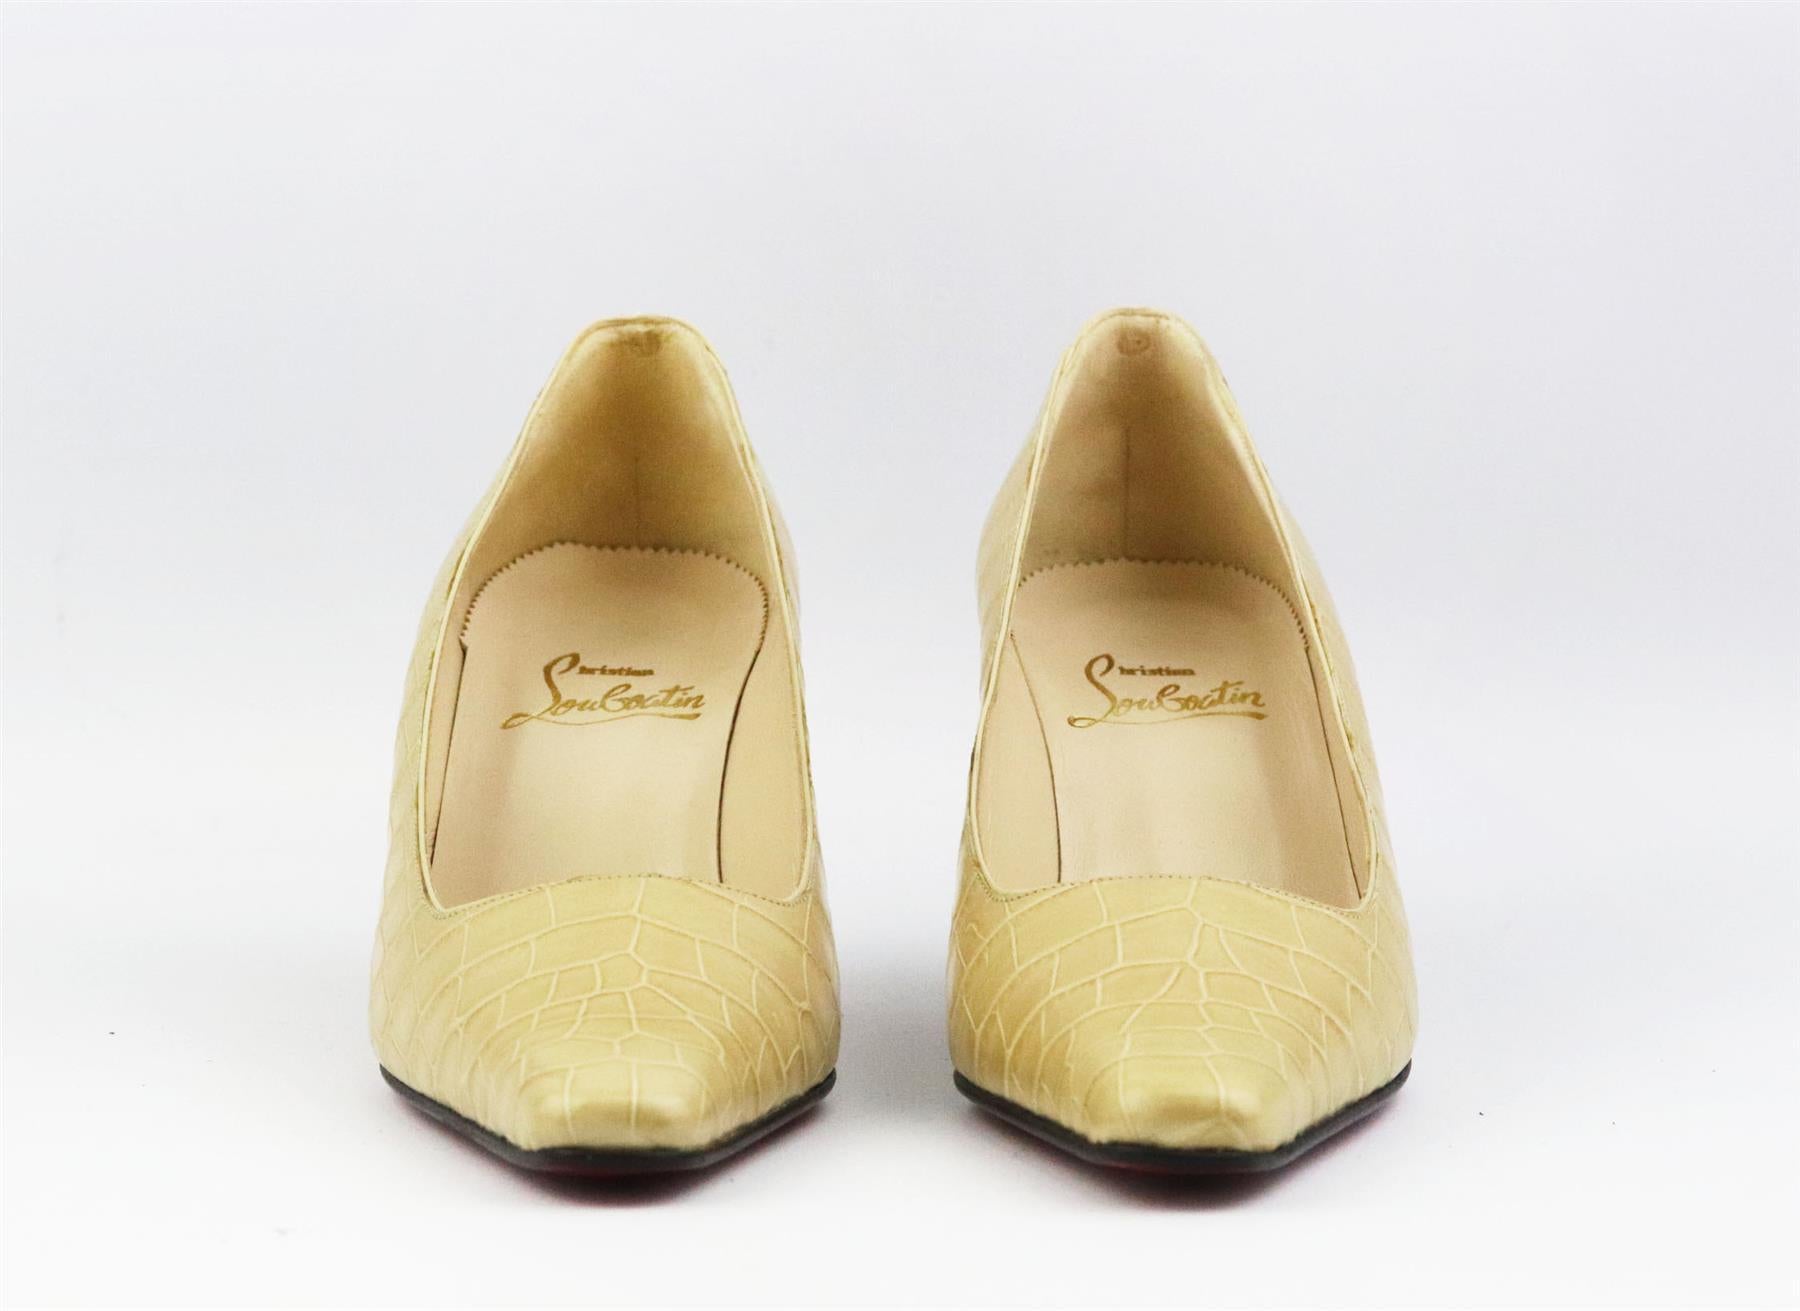 These vintage pumps by Christian Louboutin have been made in Italy and have pointy square toes and is made from beige crocodile skin and finished with a red sole. Heel measures approximately 57 mm/ 2.25 inches. Beige crocodile. Slips on. Does not